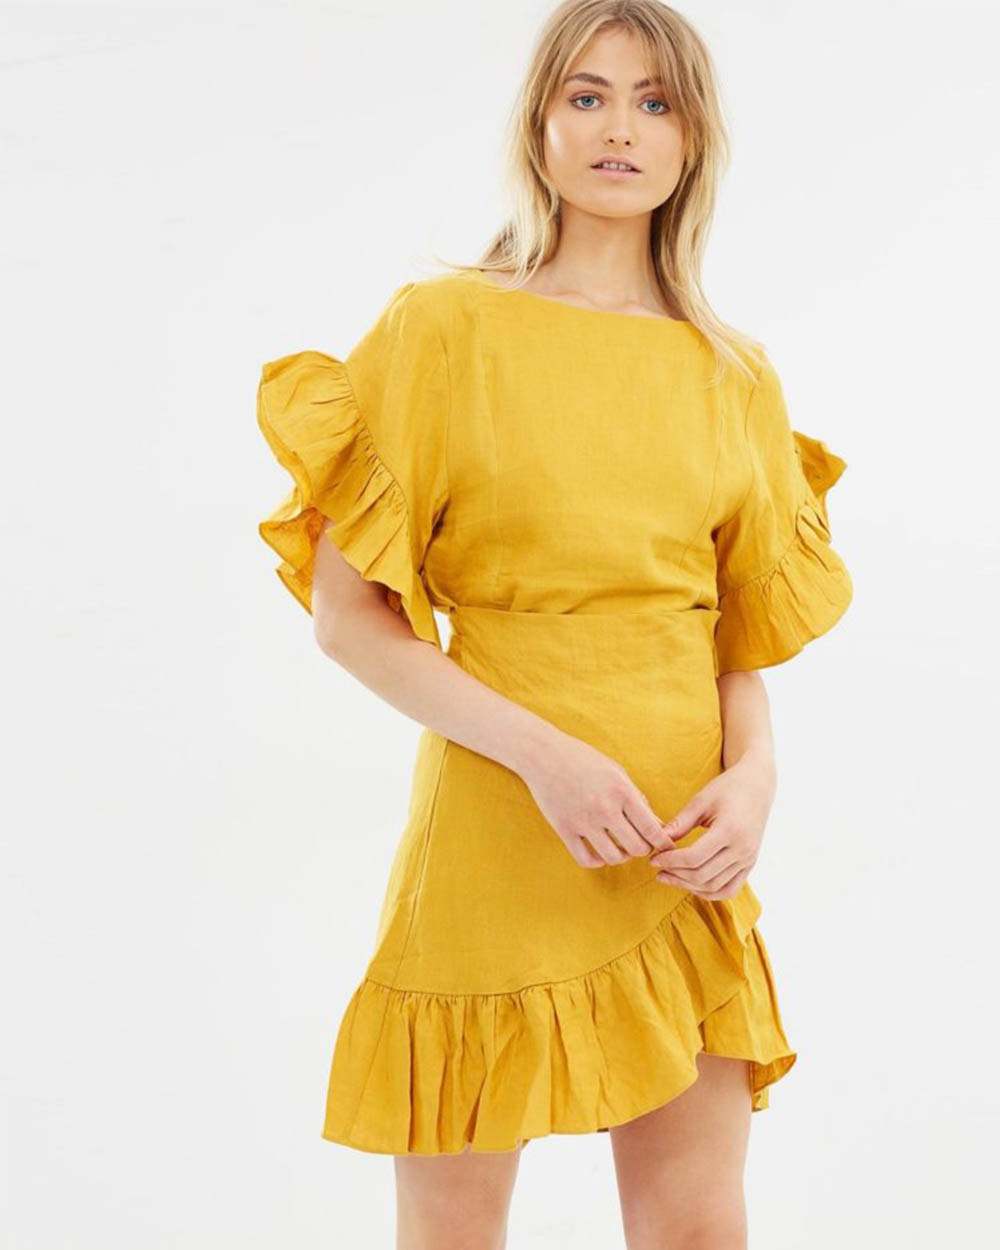 10 'Gen Z Yellow' items to spring your wardrobe into style this season